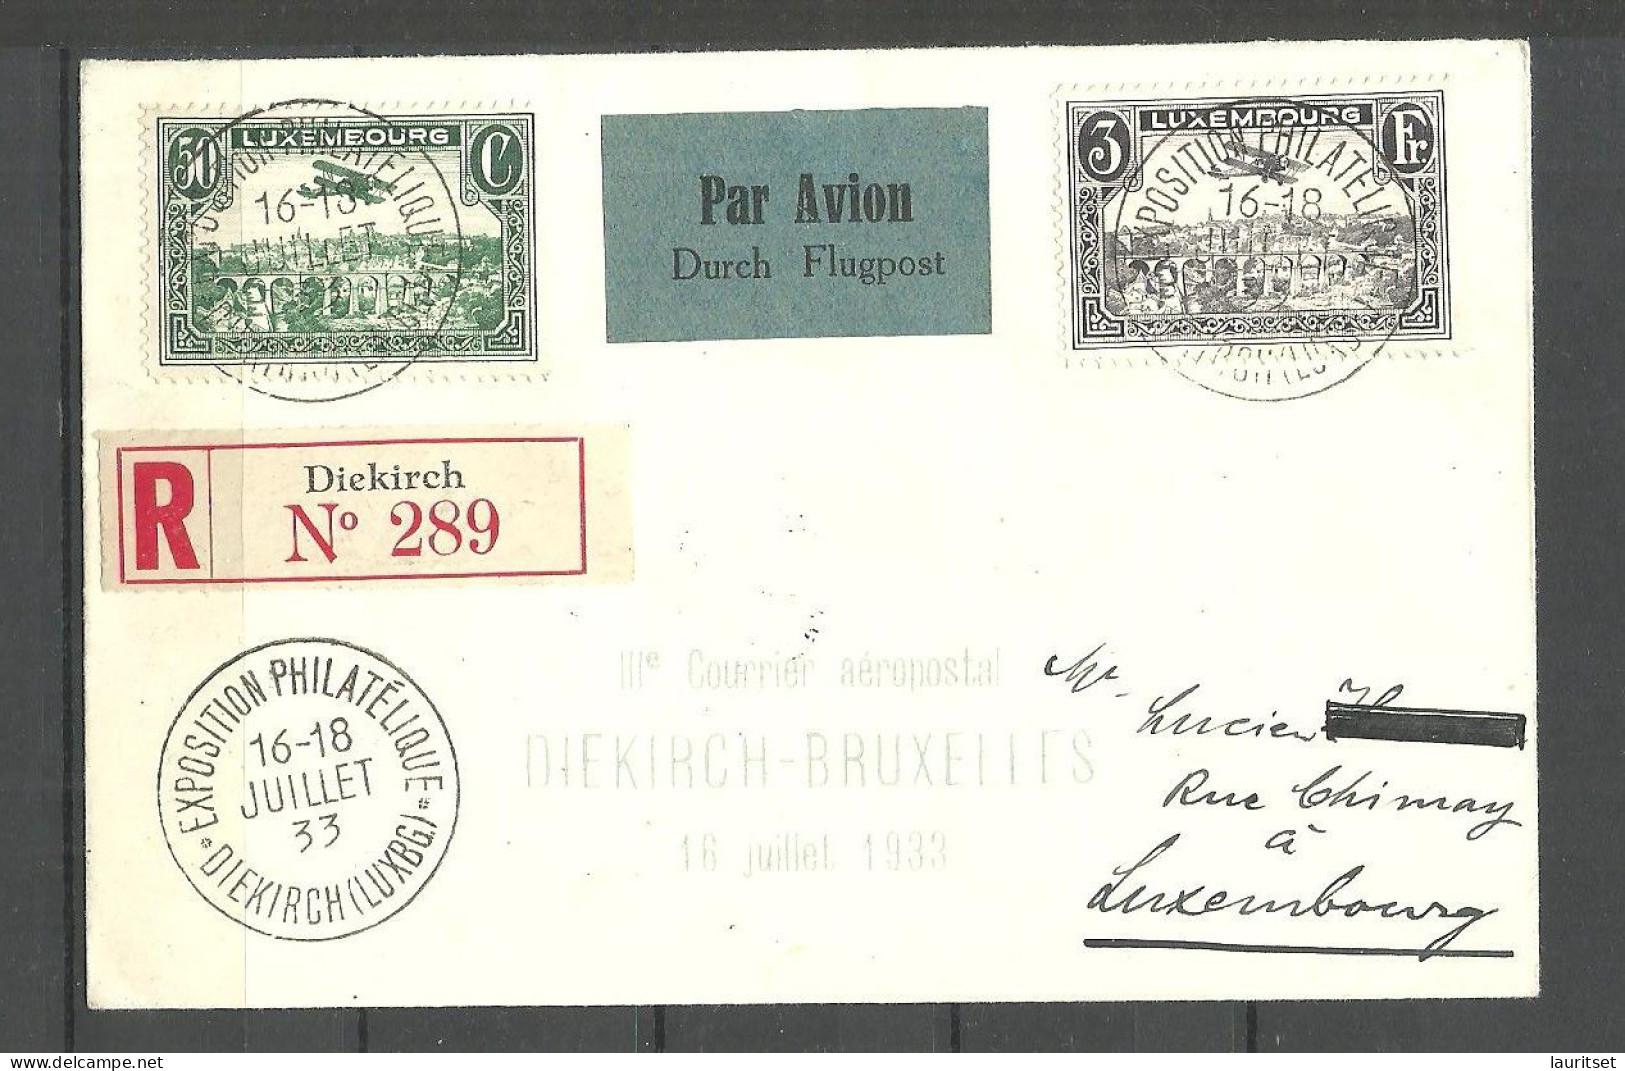 LUXEMBOURG Luxemburg 1933 Registered Air Mail Cover Diekirch Expostition Philatelique Special Cancel Mi 250 - 251 - Lettres & Documents